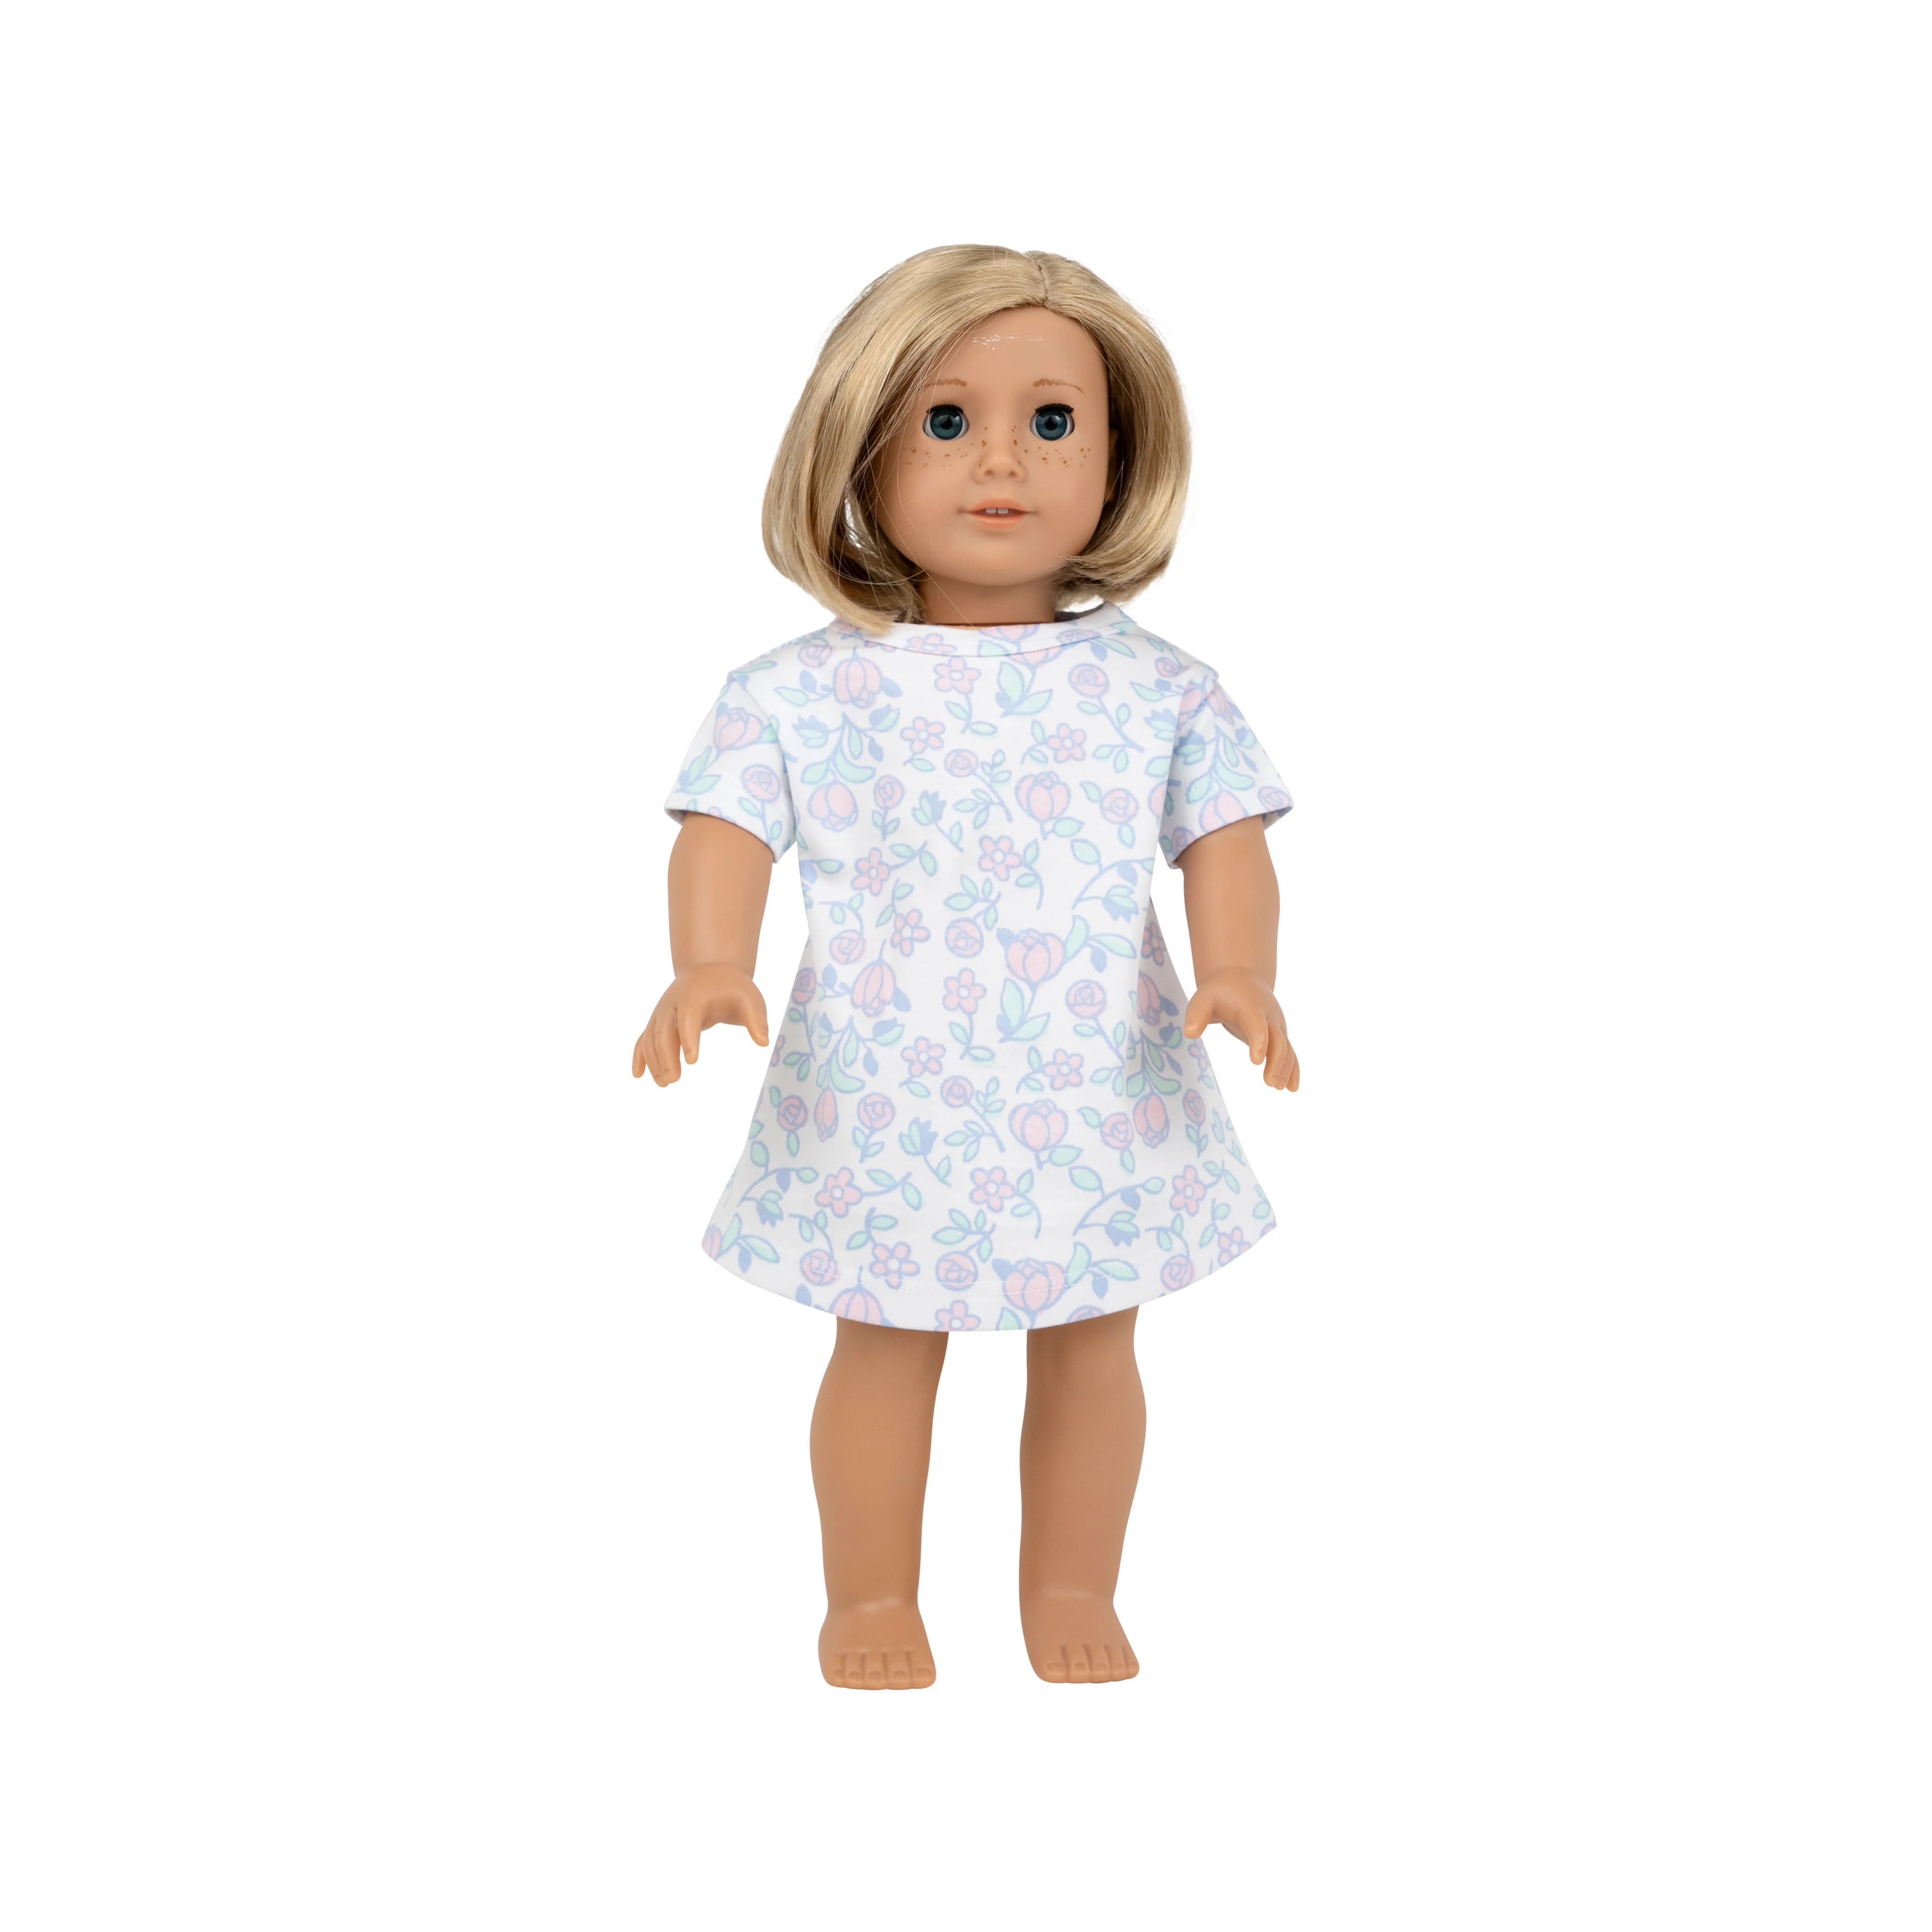 Dolly's Polly Play Dress - Posies and Peonies | The Beaufort Bonnet Company